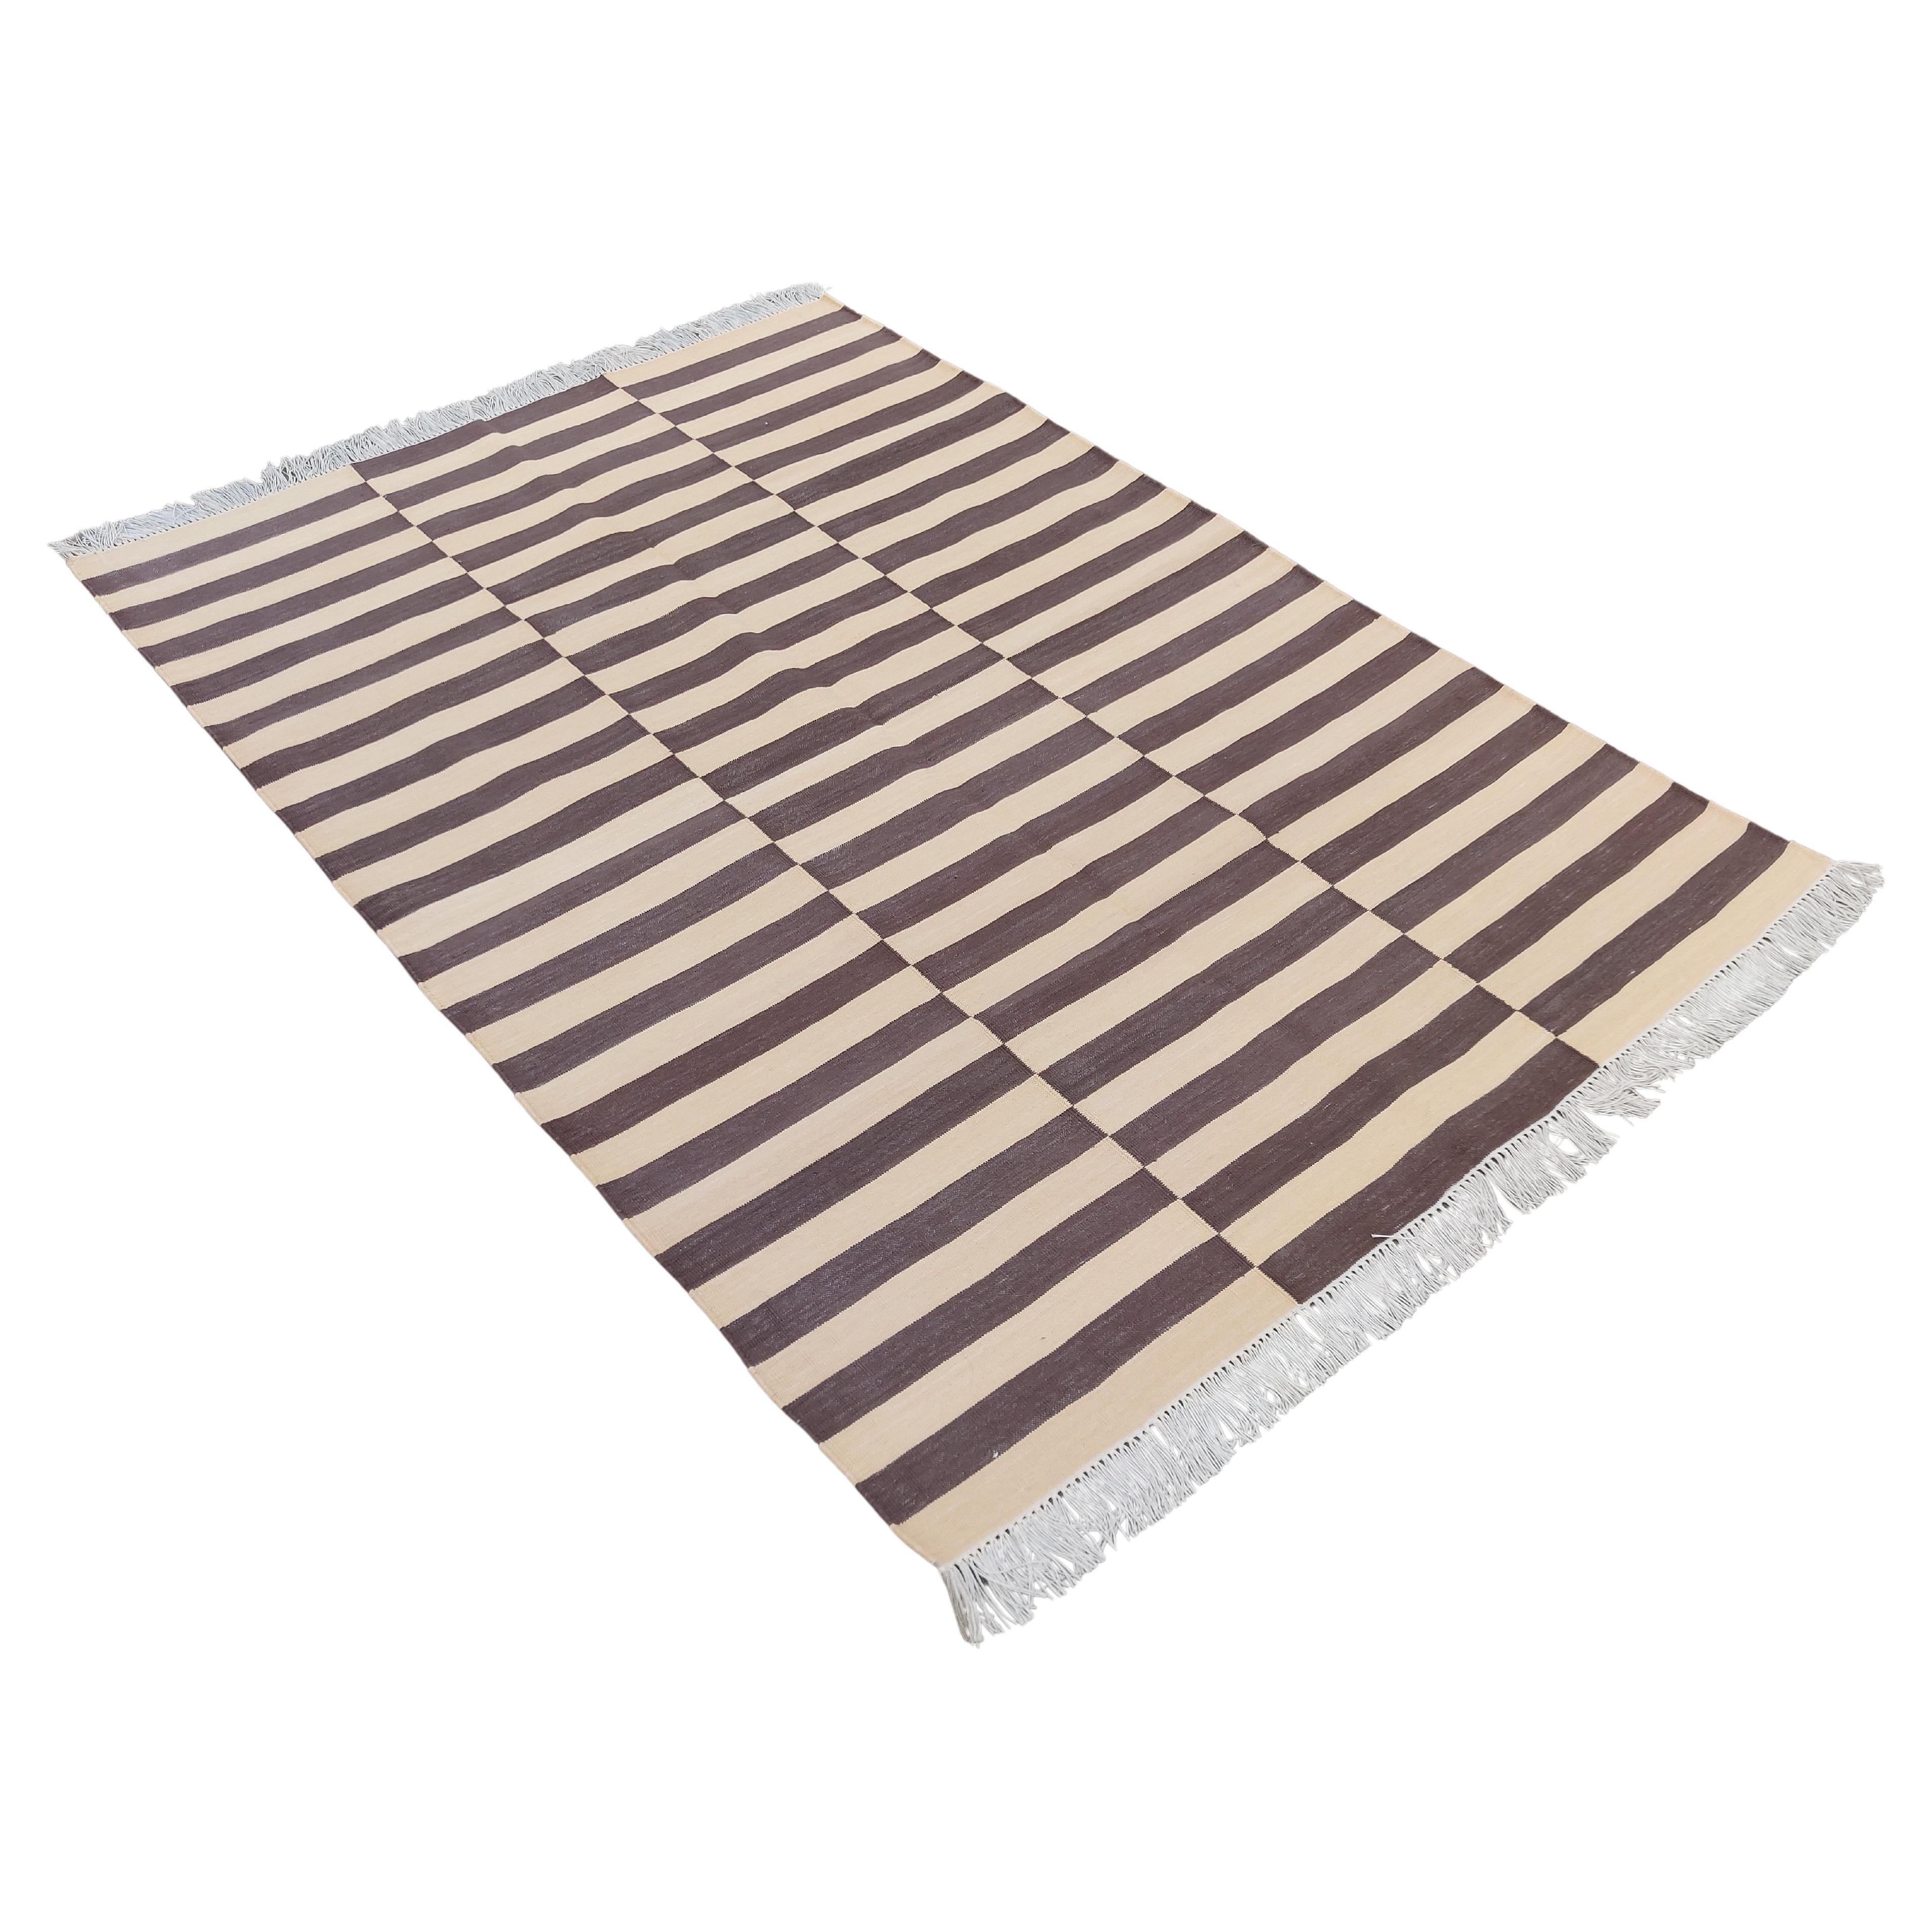 Handmade Cotton Area Flat Weave Rug, 4x6 Brown And Beige Striped Indian Dhurrie For Sale